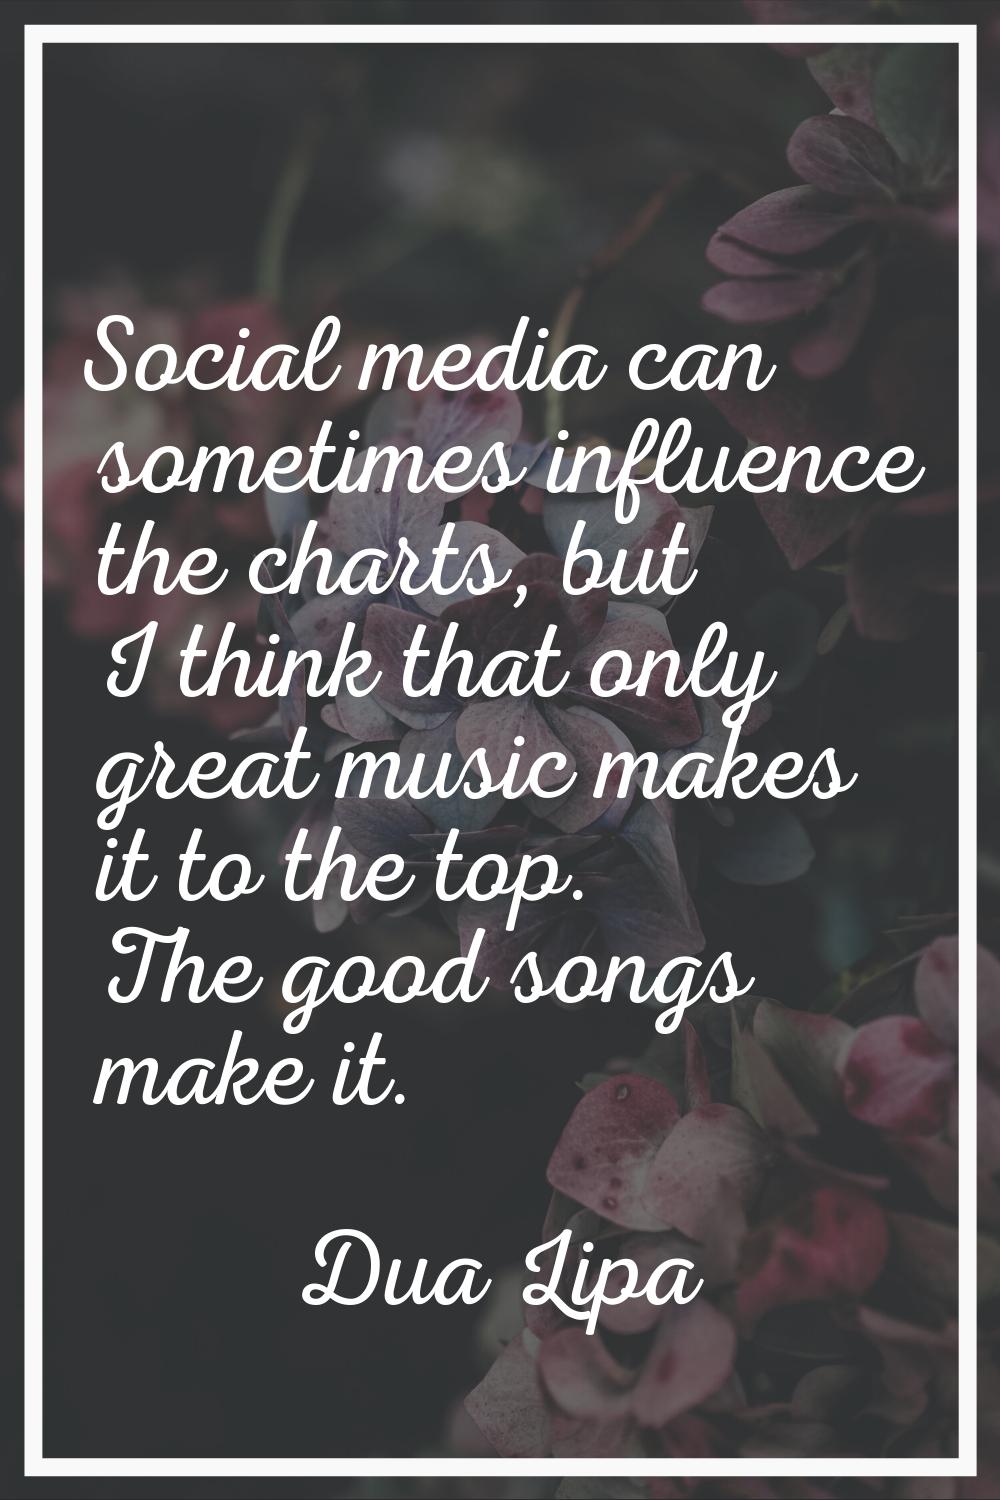 Social media can sometimes influence the charts, but I think that only great music makes it to the 